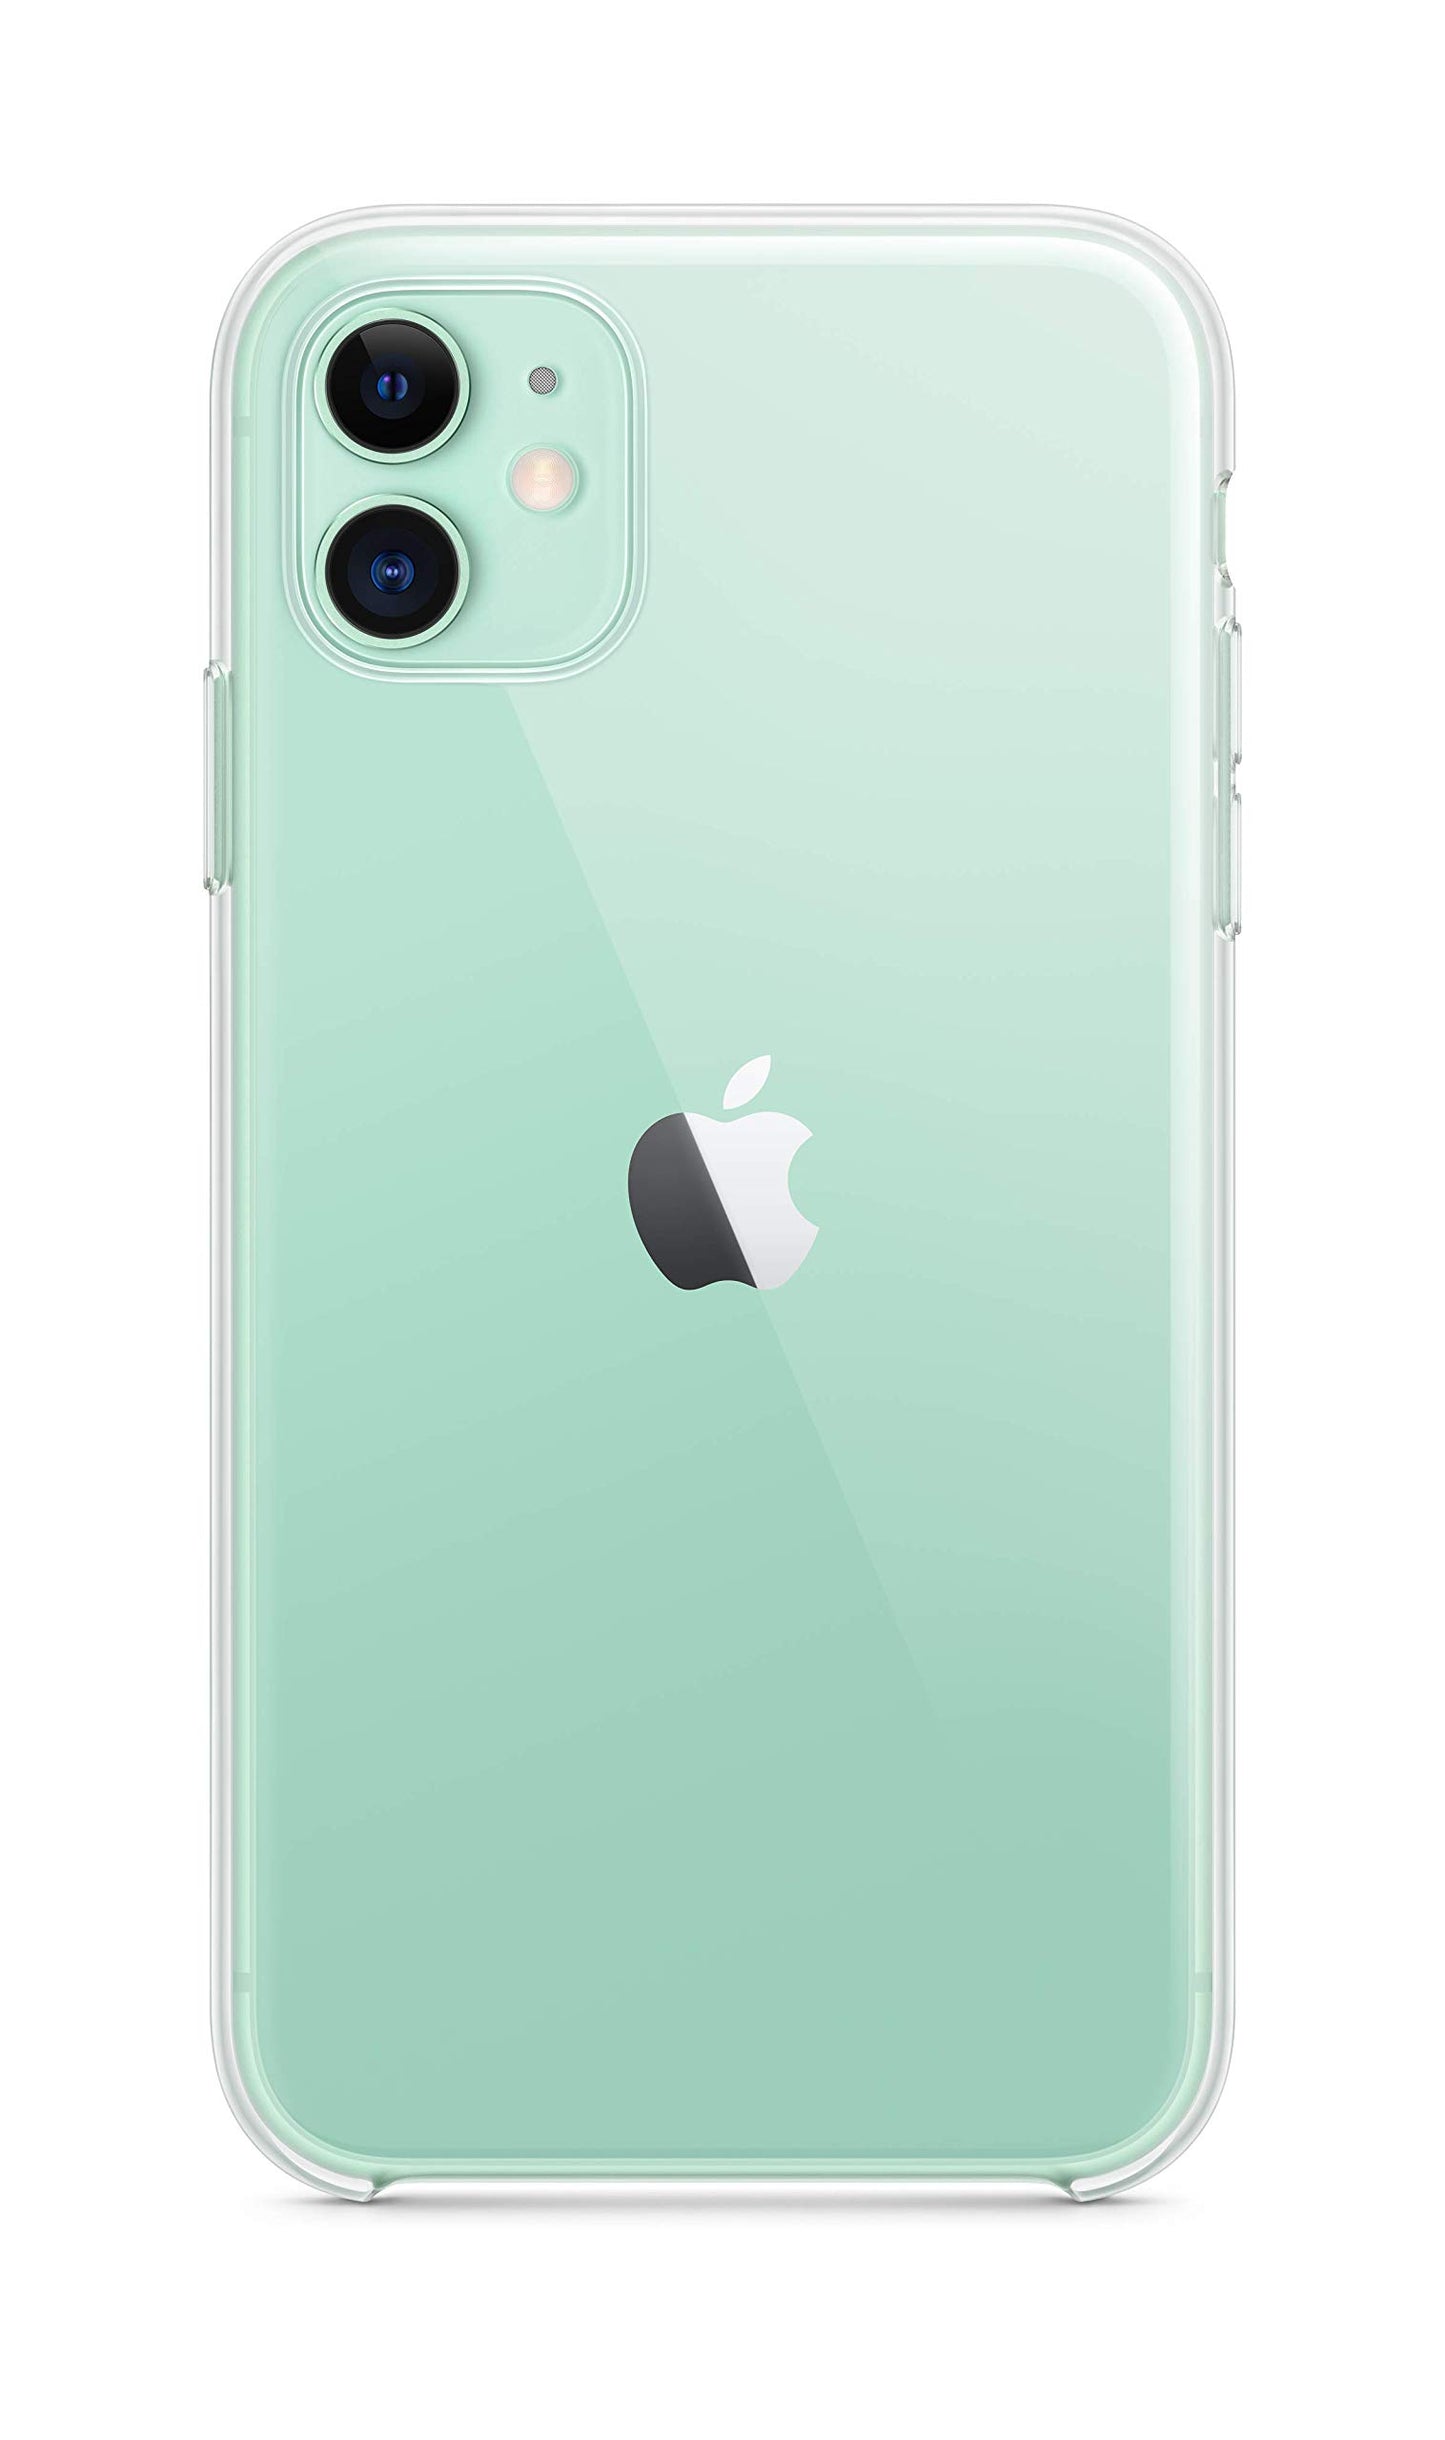 Apple iPhone 11 Polycarbonate Clear Case - Slim Fit, Wireless Charging Compatible, Water Resistant